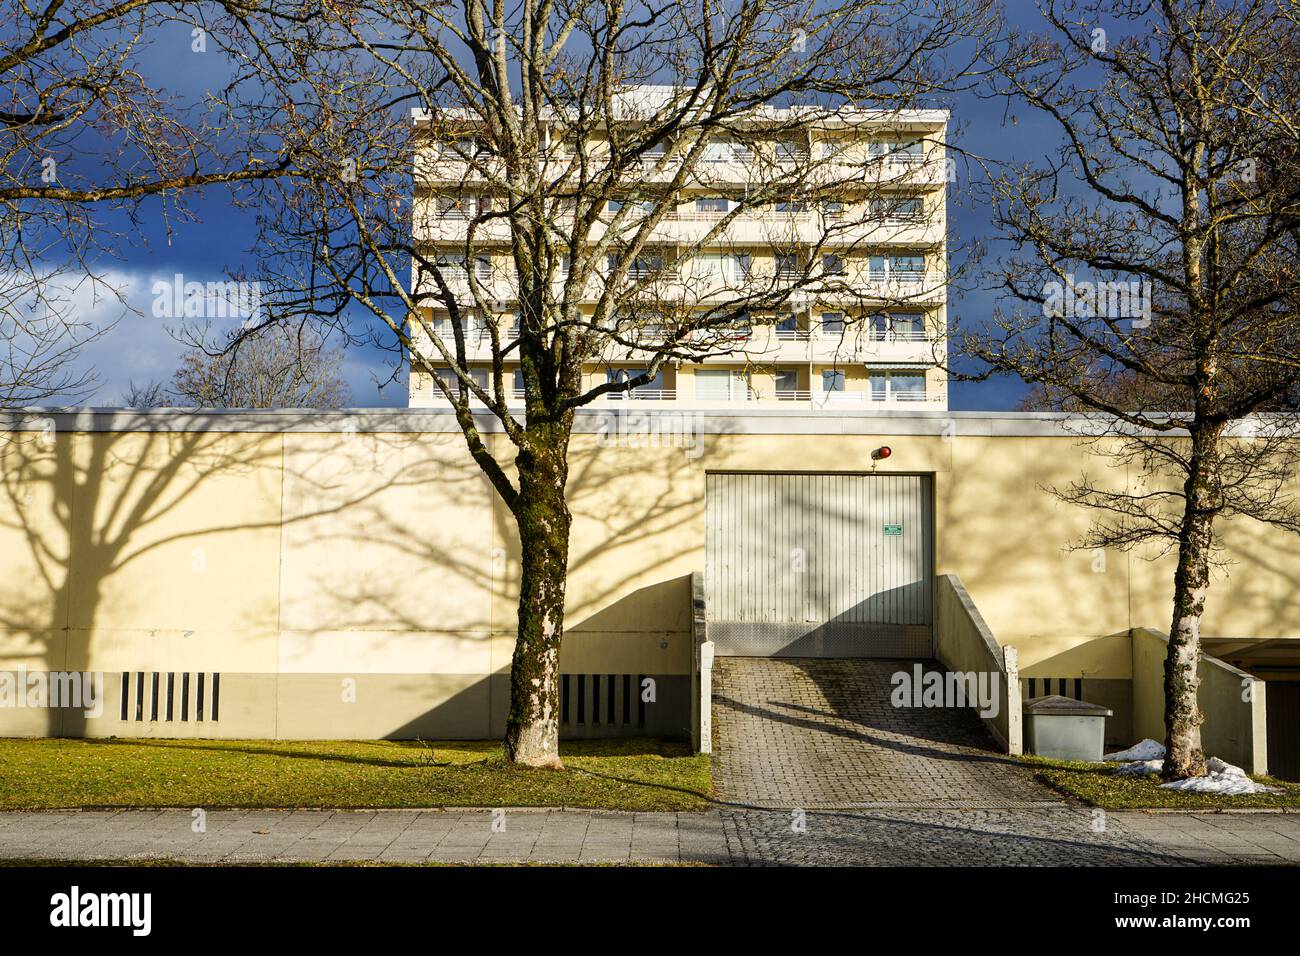 A flat elongated garage building with a gate. On the beige wall shadow reflections of trees. Behind it a tall apartment building complex. Stock Photo